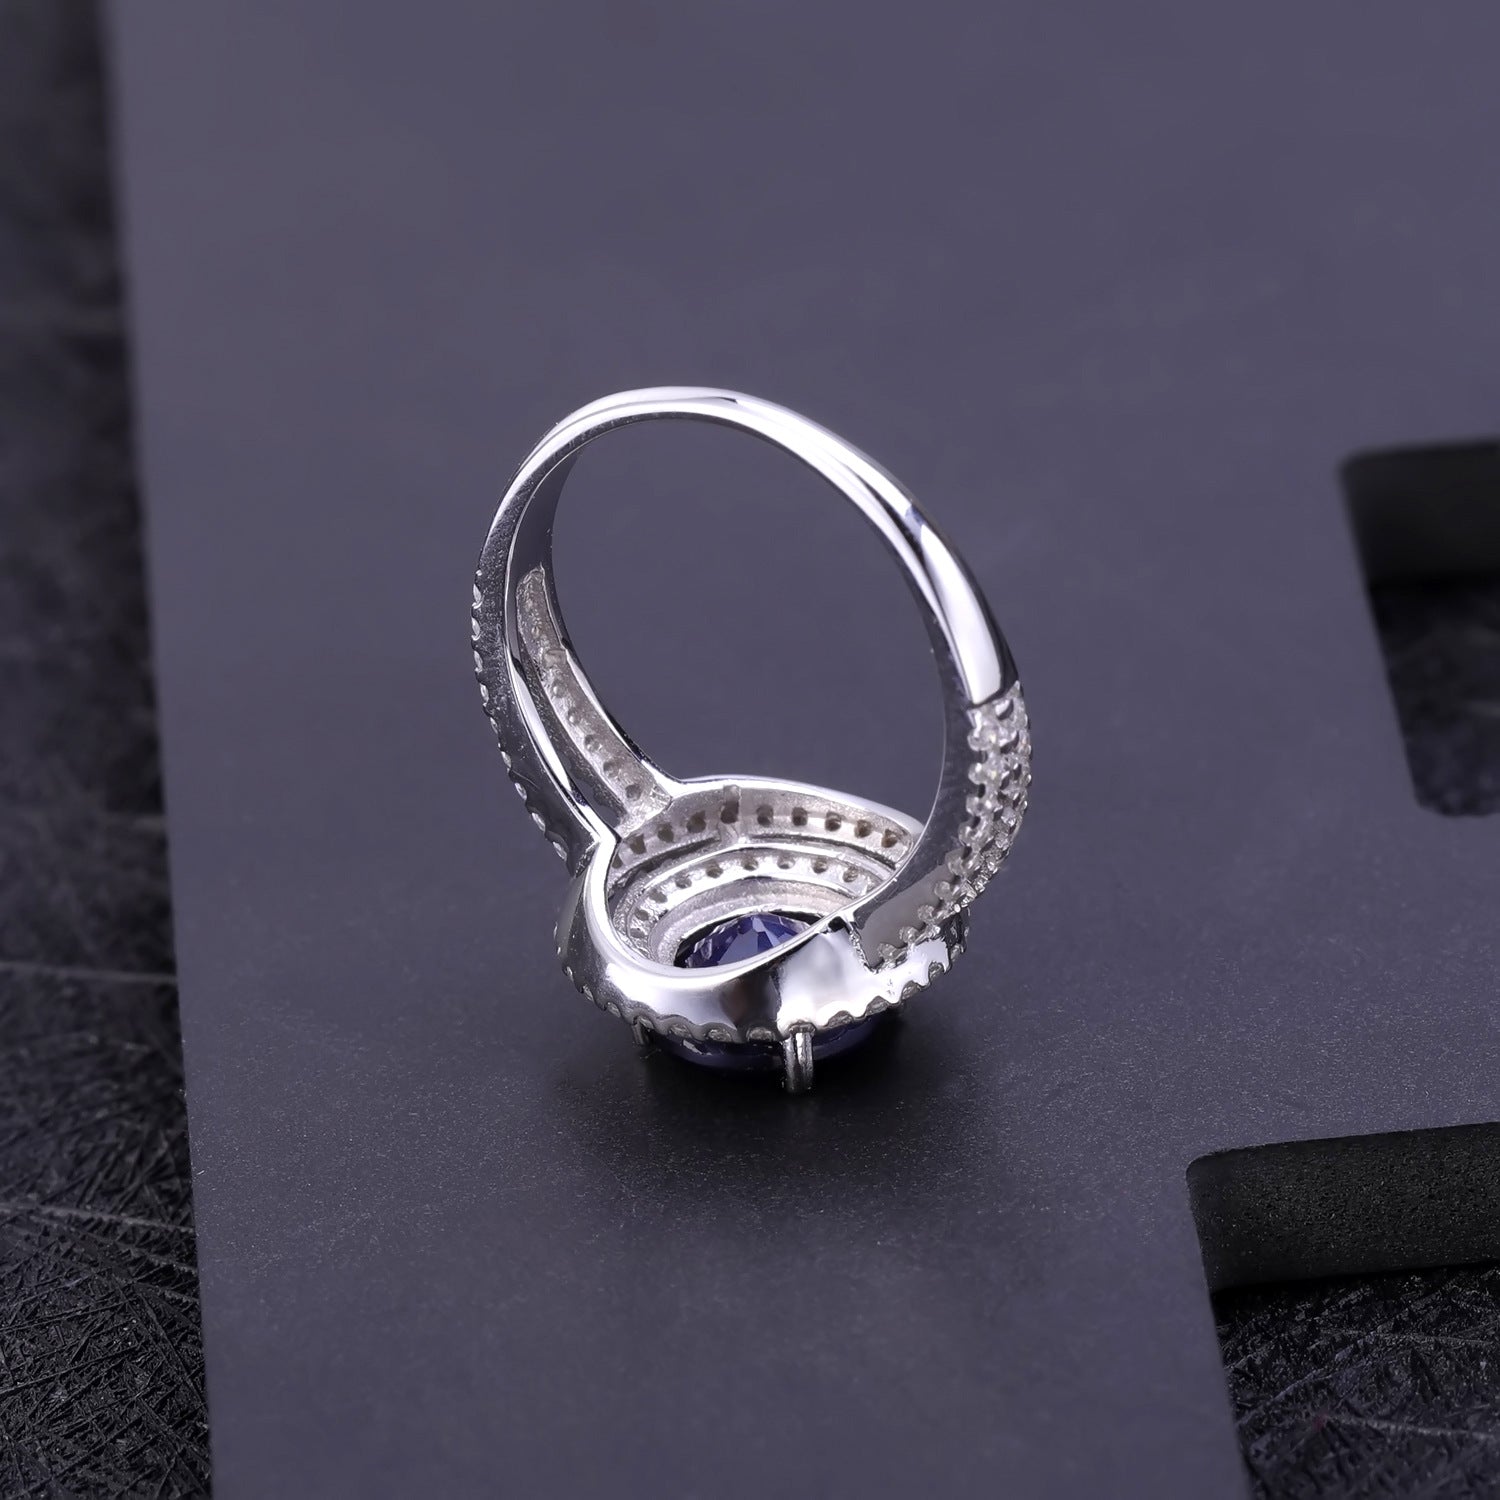 European Vintage Style Round Cut Crystal Luxury Soleste Halo Sterling Silver Ring for Women